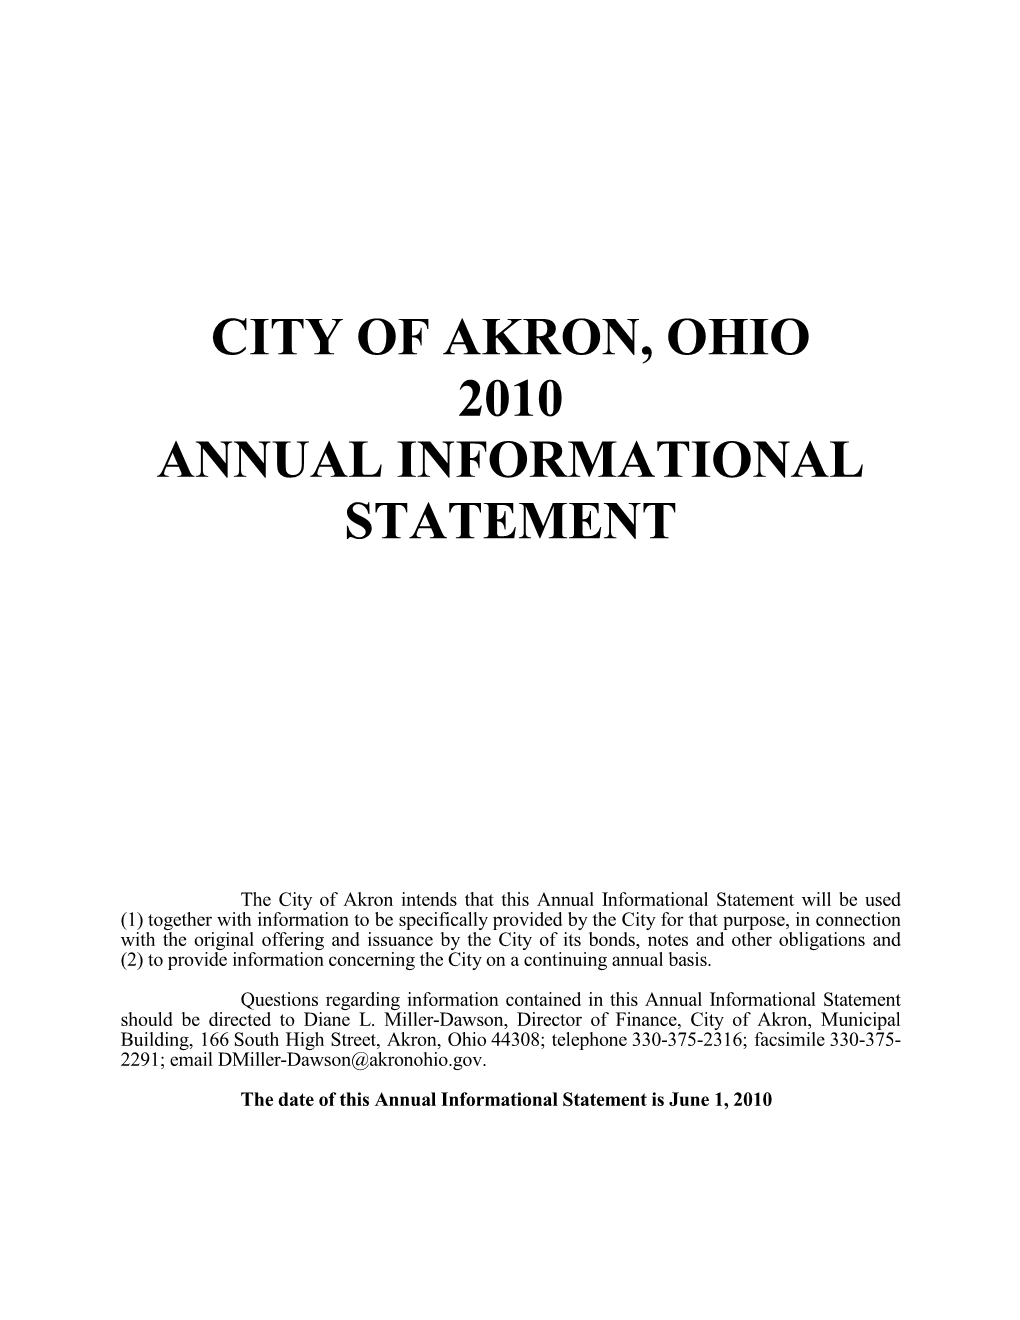 City of Akron, Ohio 2010 Annual Informational Statement